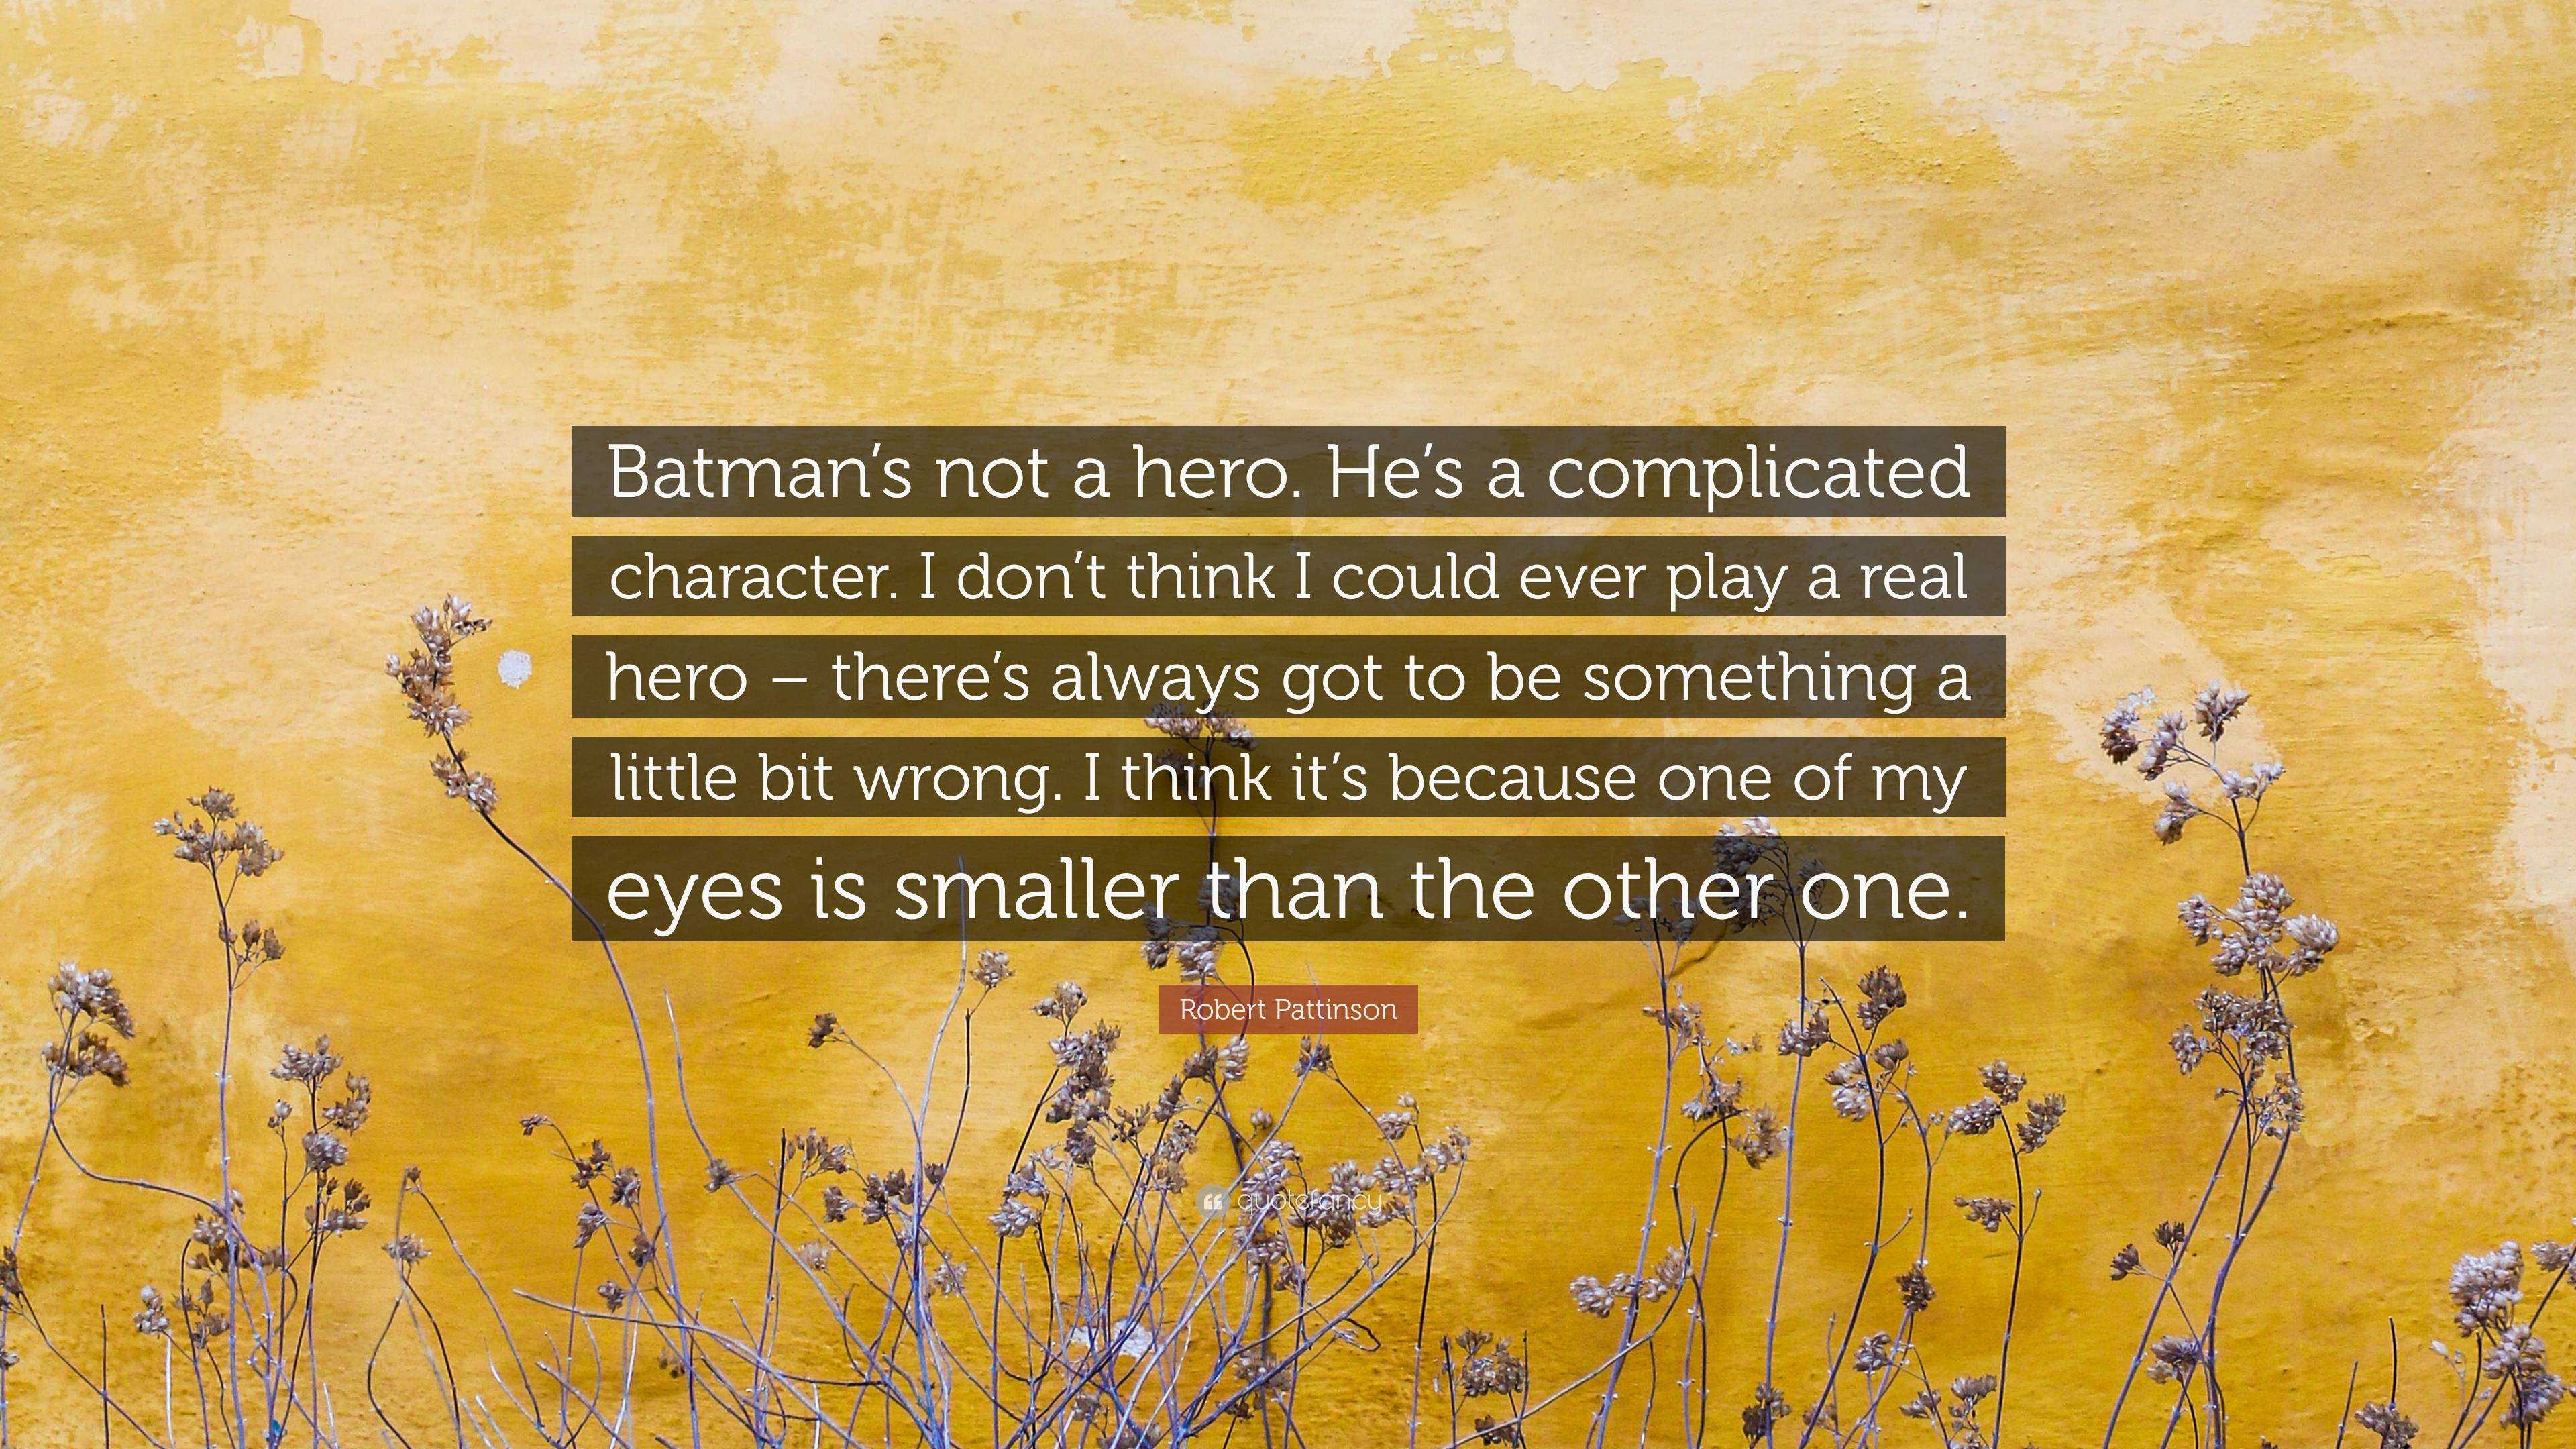 Robert Pattinson Quote: “Batman's not a hero. He's a complicated character.  I don't think I could ever play a real hero – there's always got to b...”